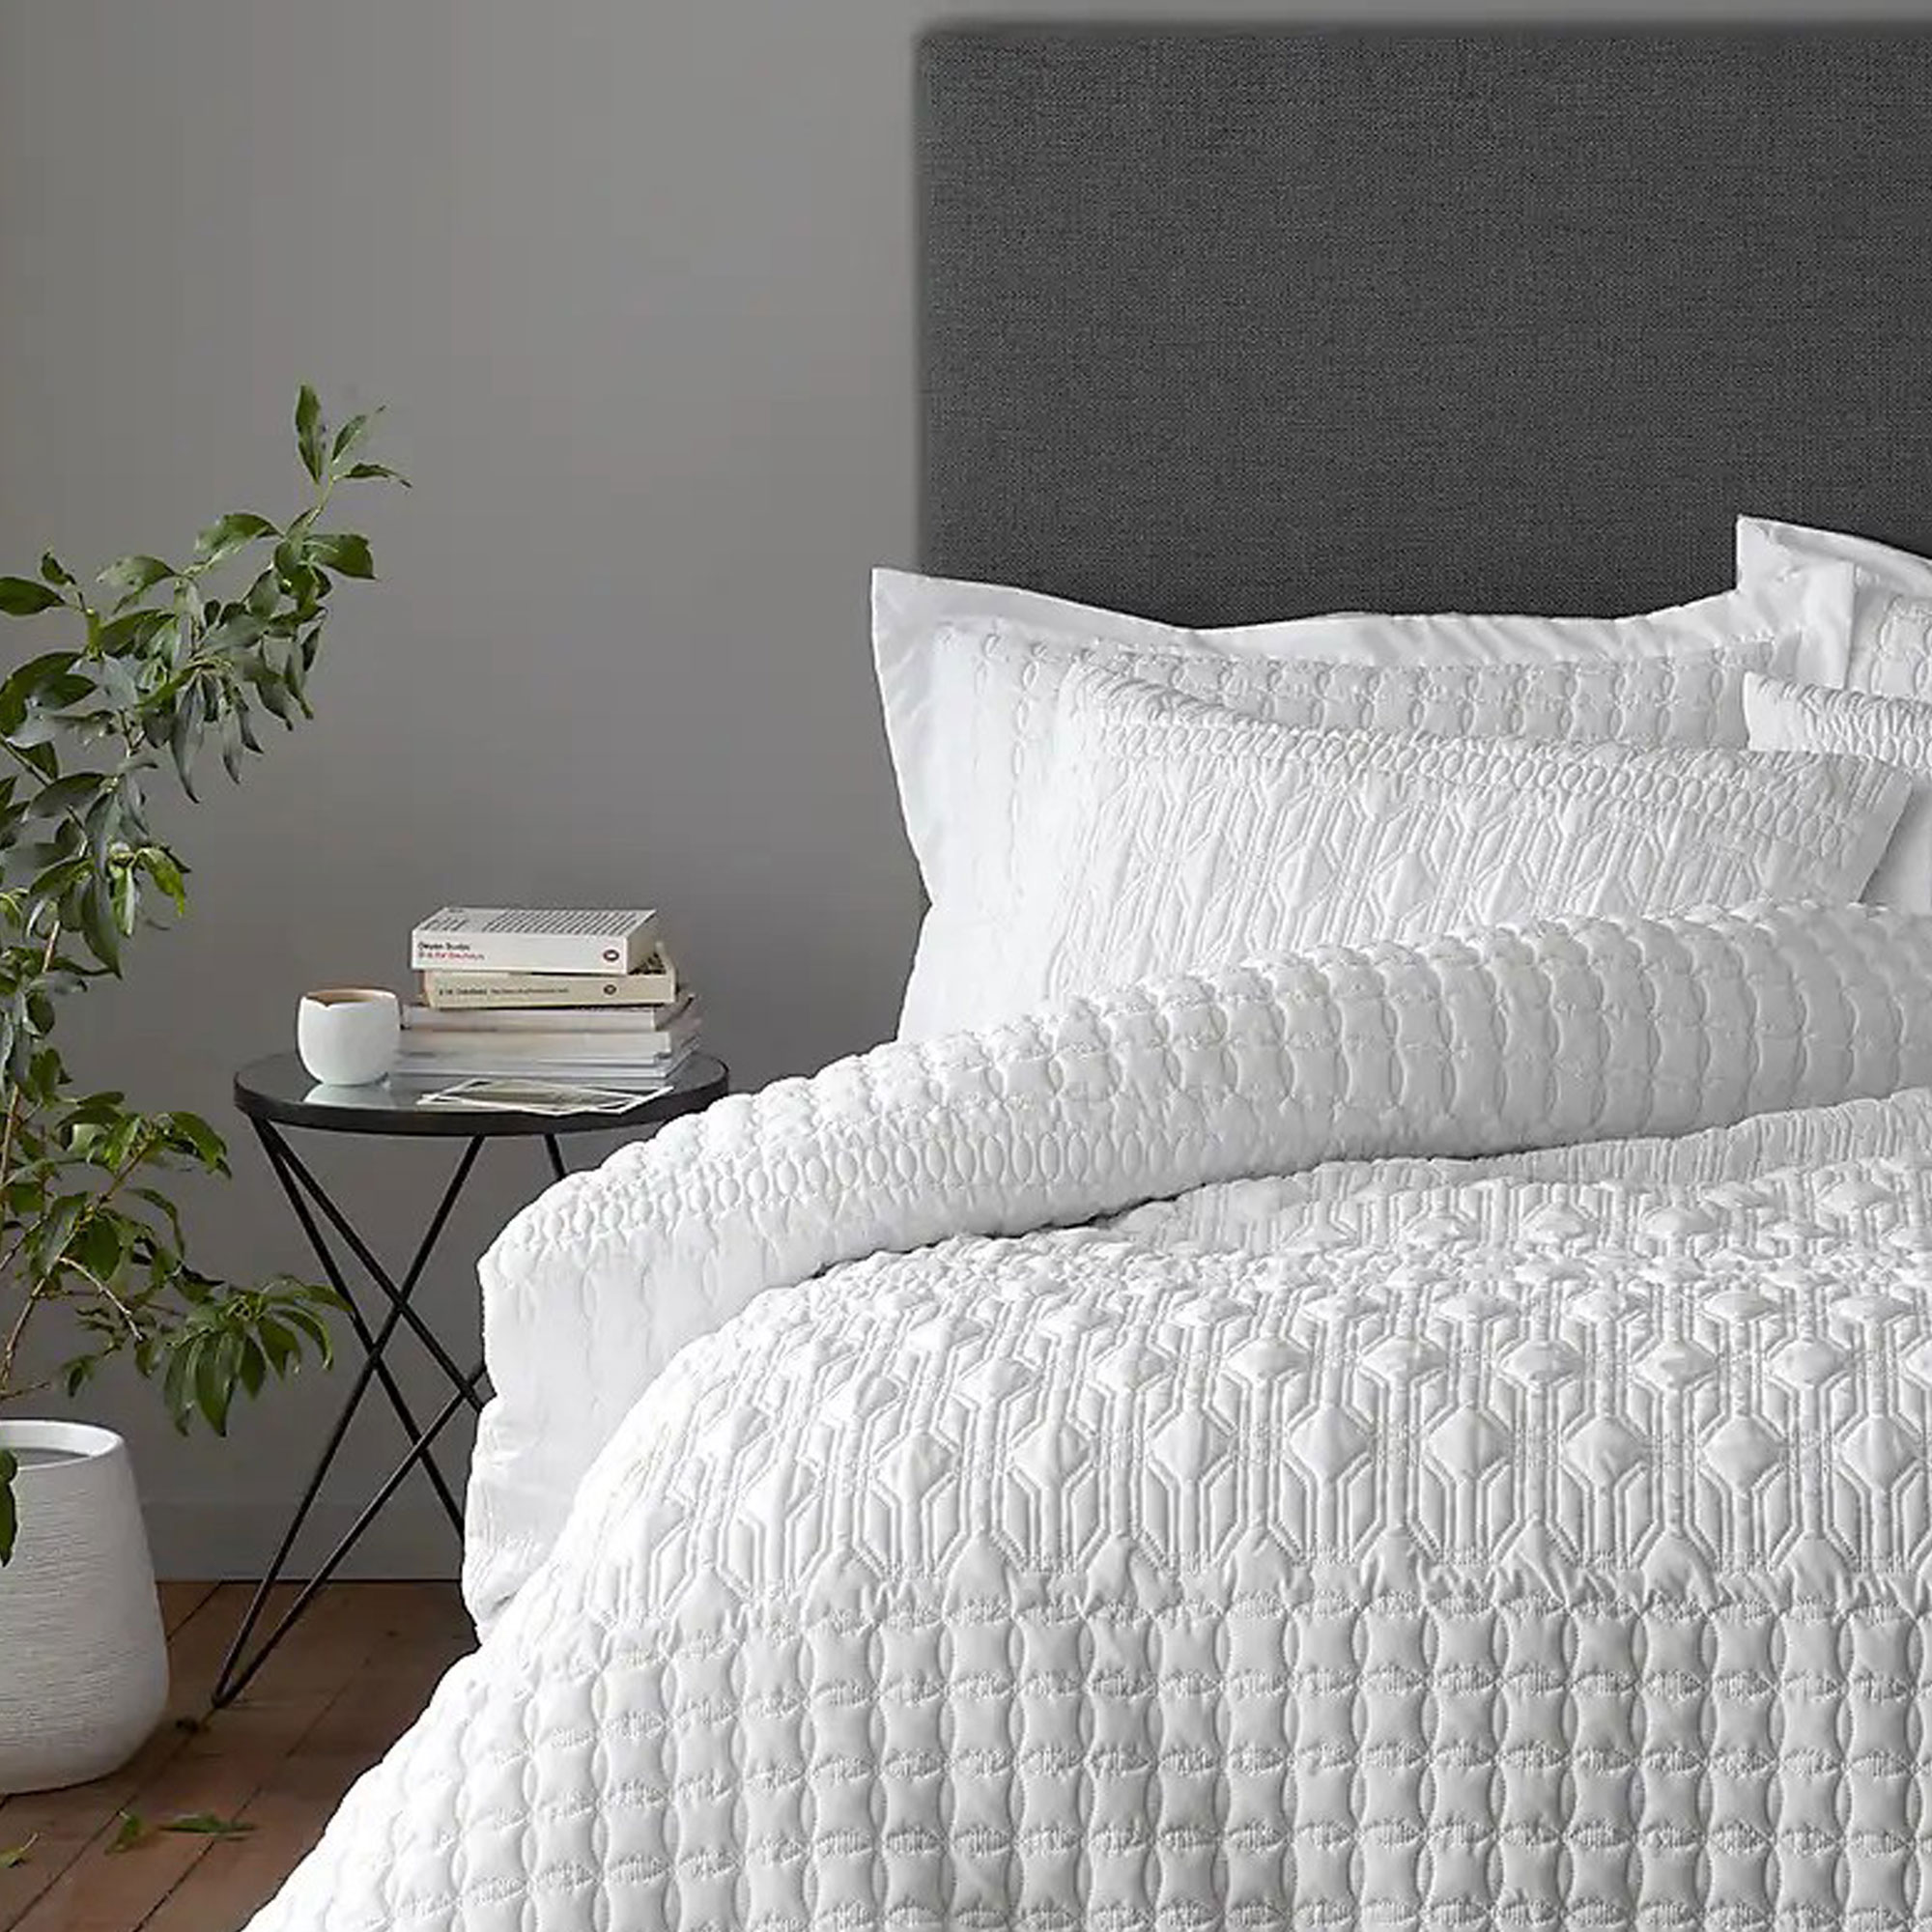 Our 10 most popular bedroom essentials of 2023 and why you should invest in them right now